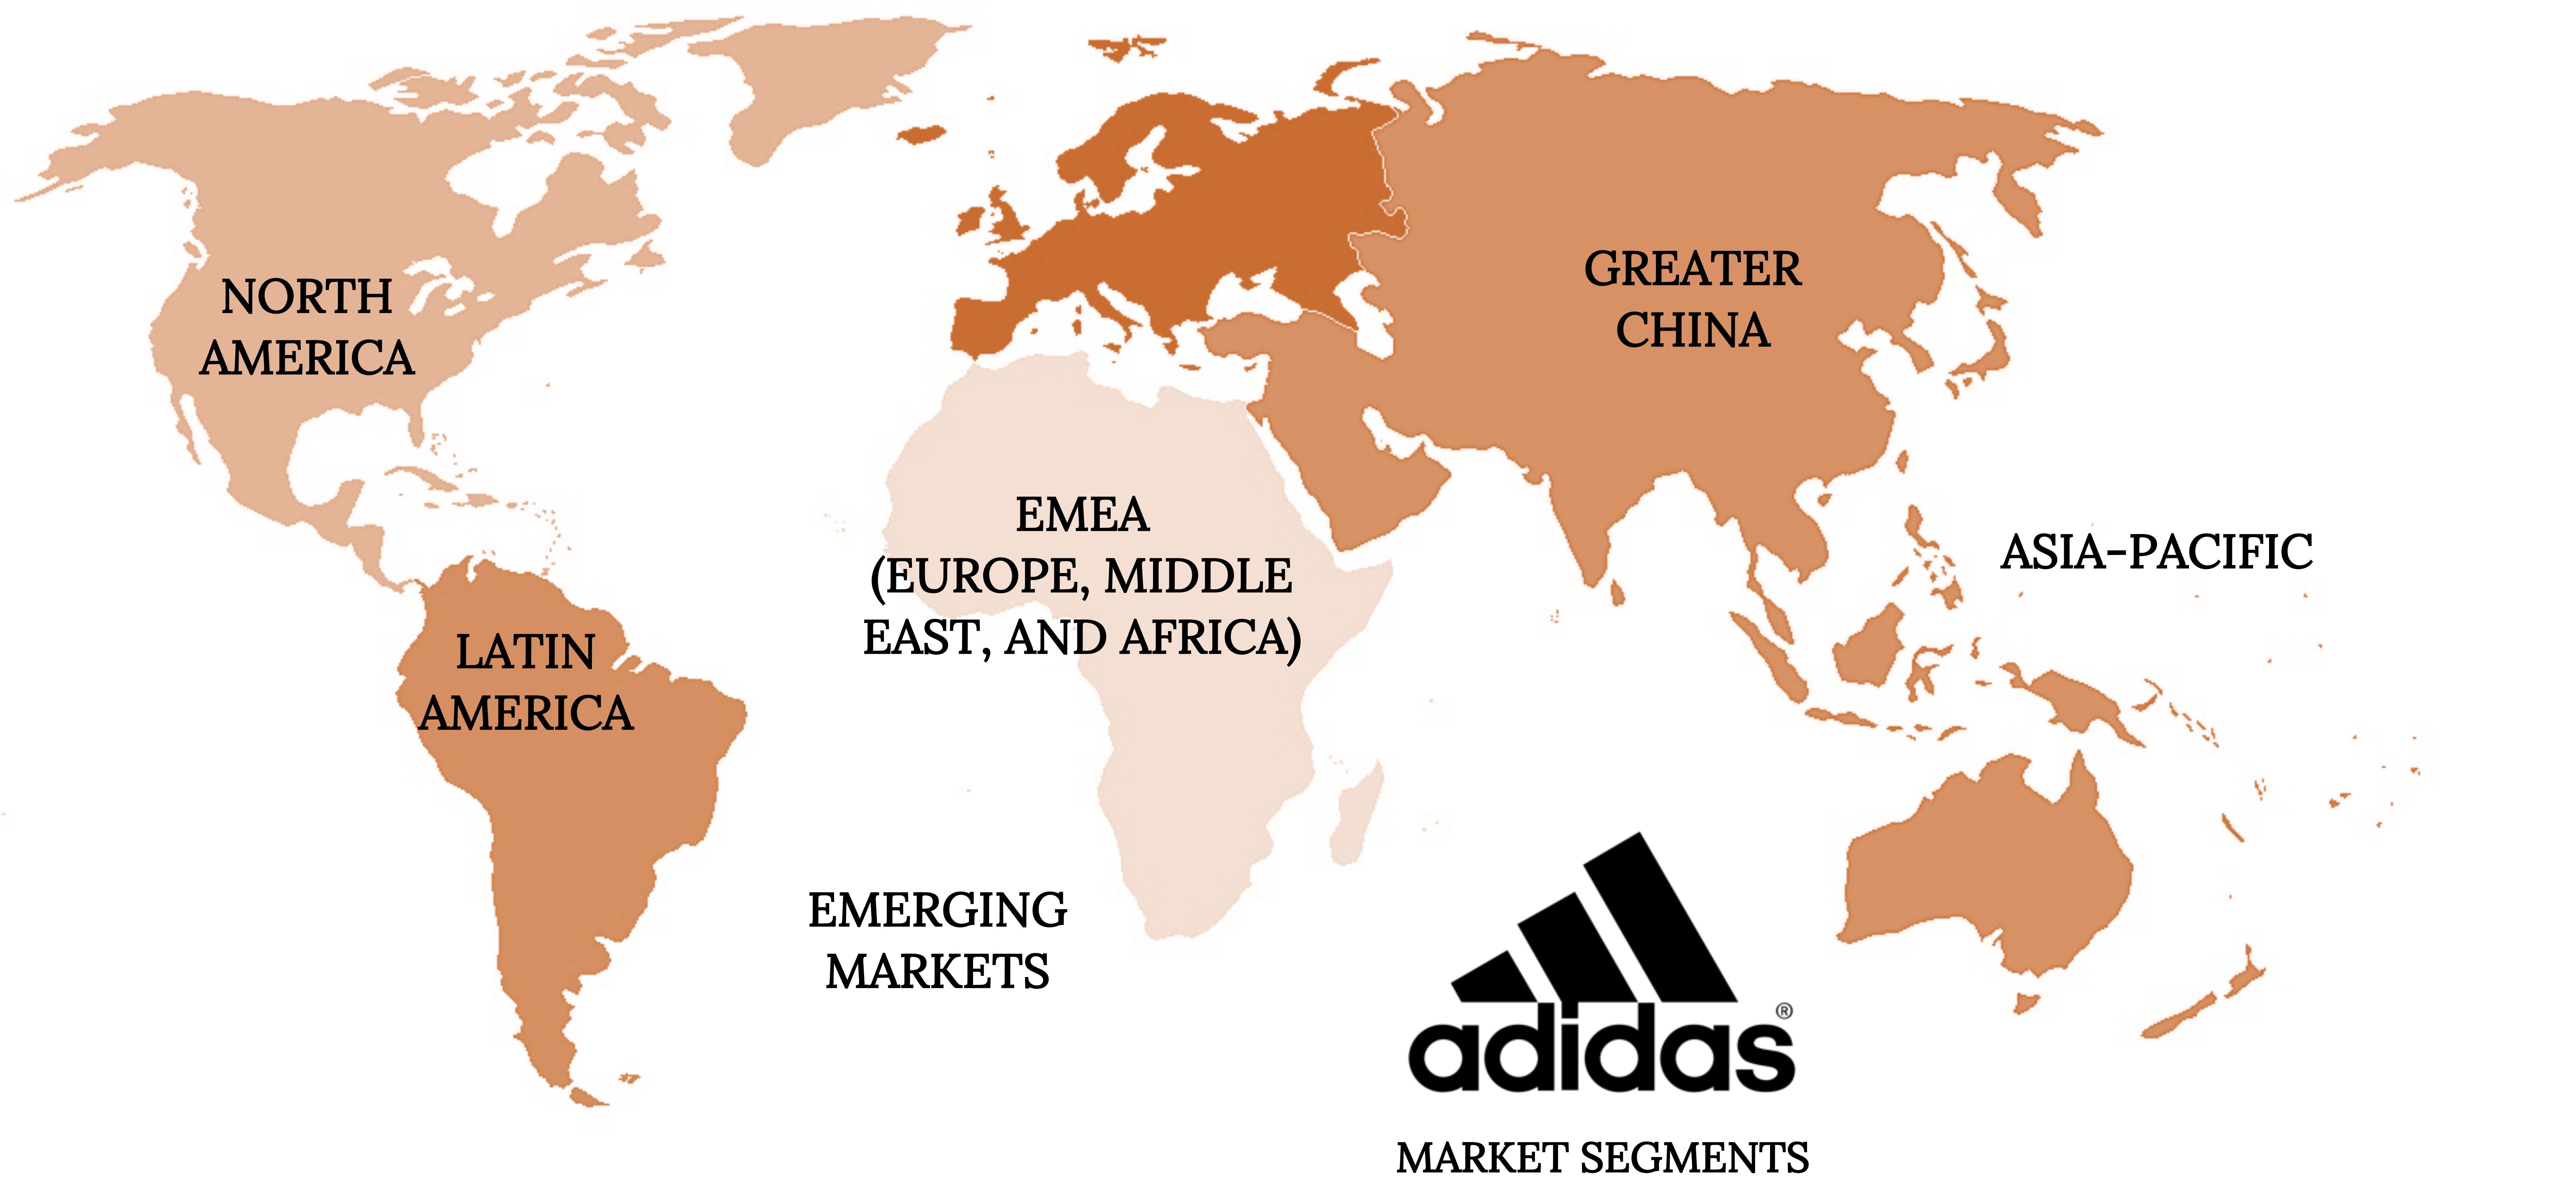 A map of the world showing locations of Adidas geographic divisions. The Adidas logo sits in the bottom right corner. Names of each division are listed on their location on the map: North America, Latin America, EMEA (Europe, middle east, and Africa), Greater China, and Asia-Pacific. The region “Emerging Markets” is listed near the bottom left of the map over the ocean.